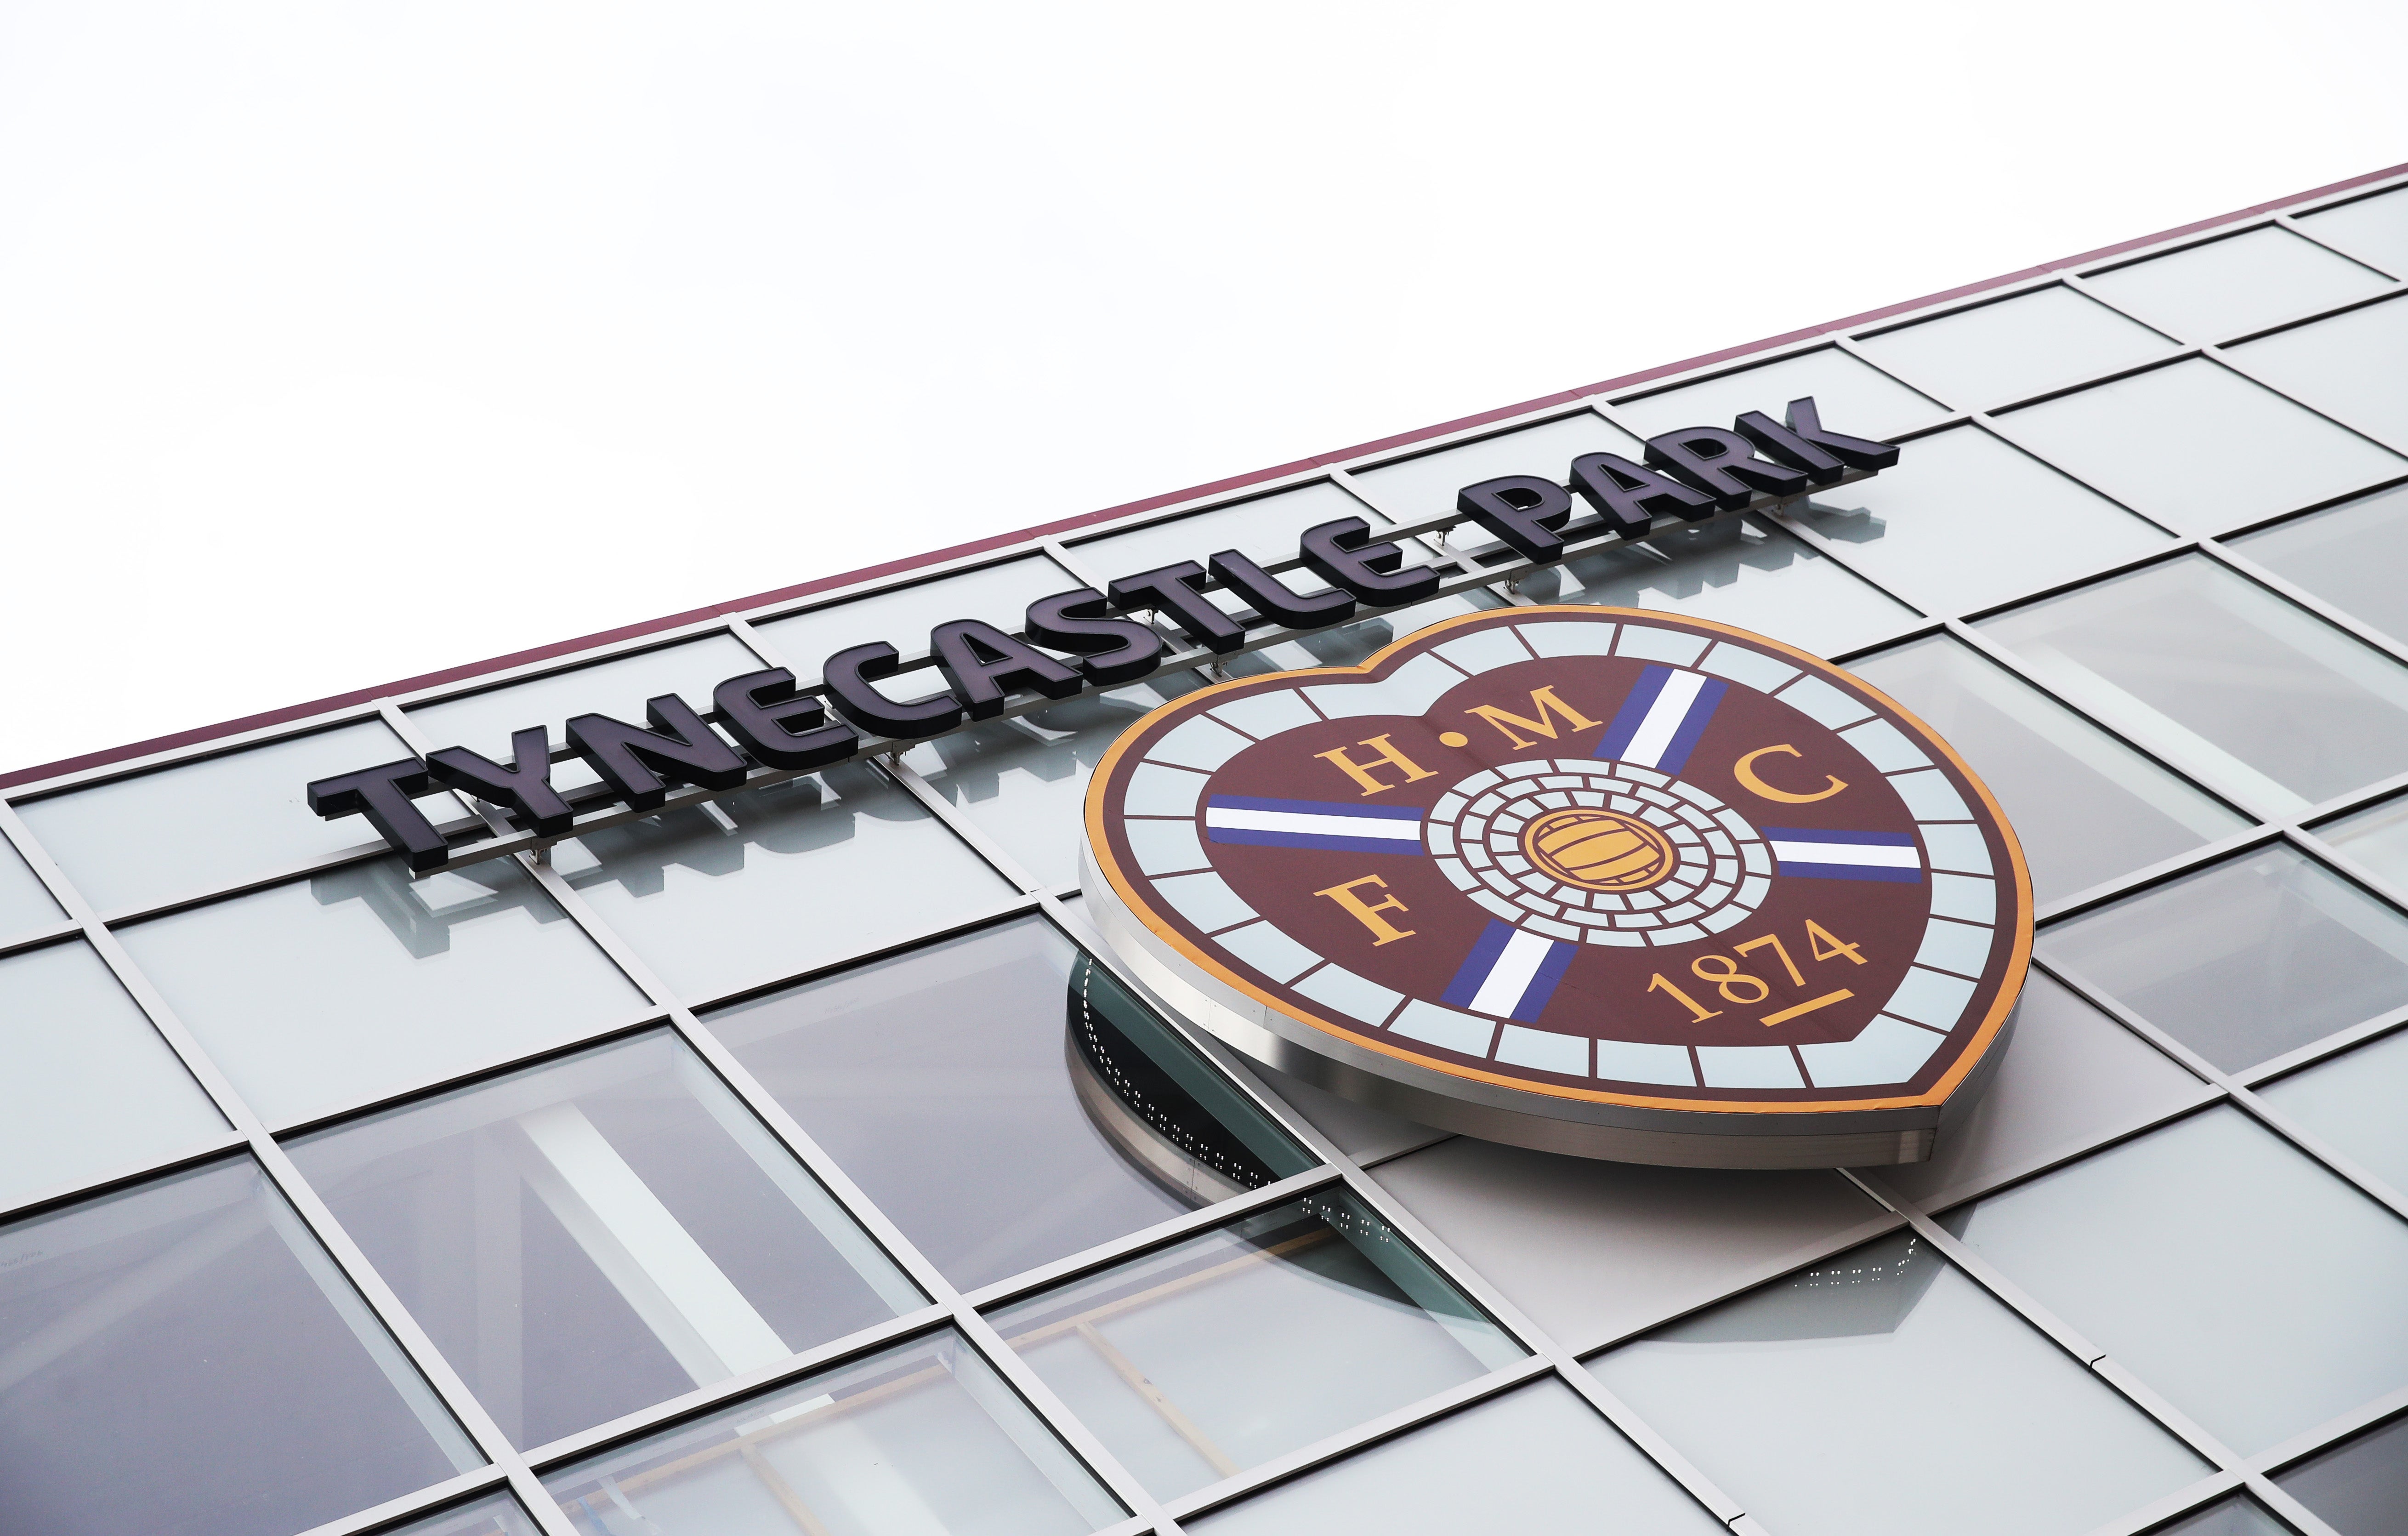 Hearts have become the biggest community-owned football club in Britain